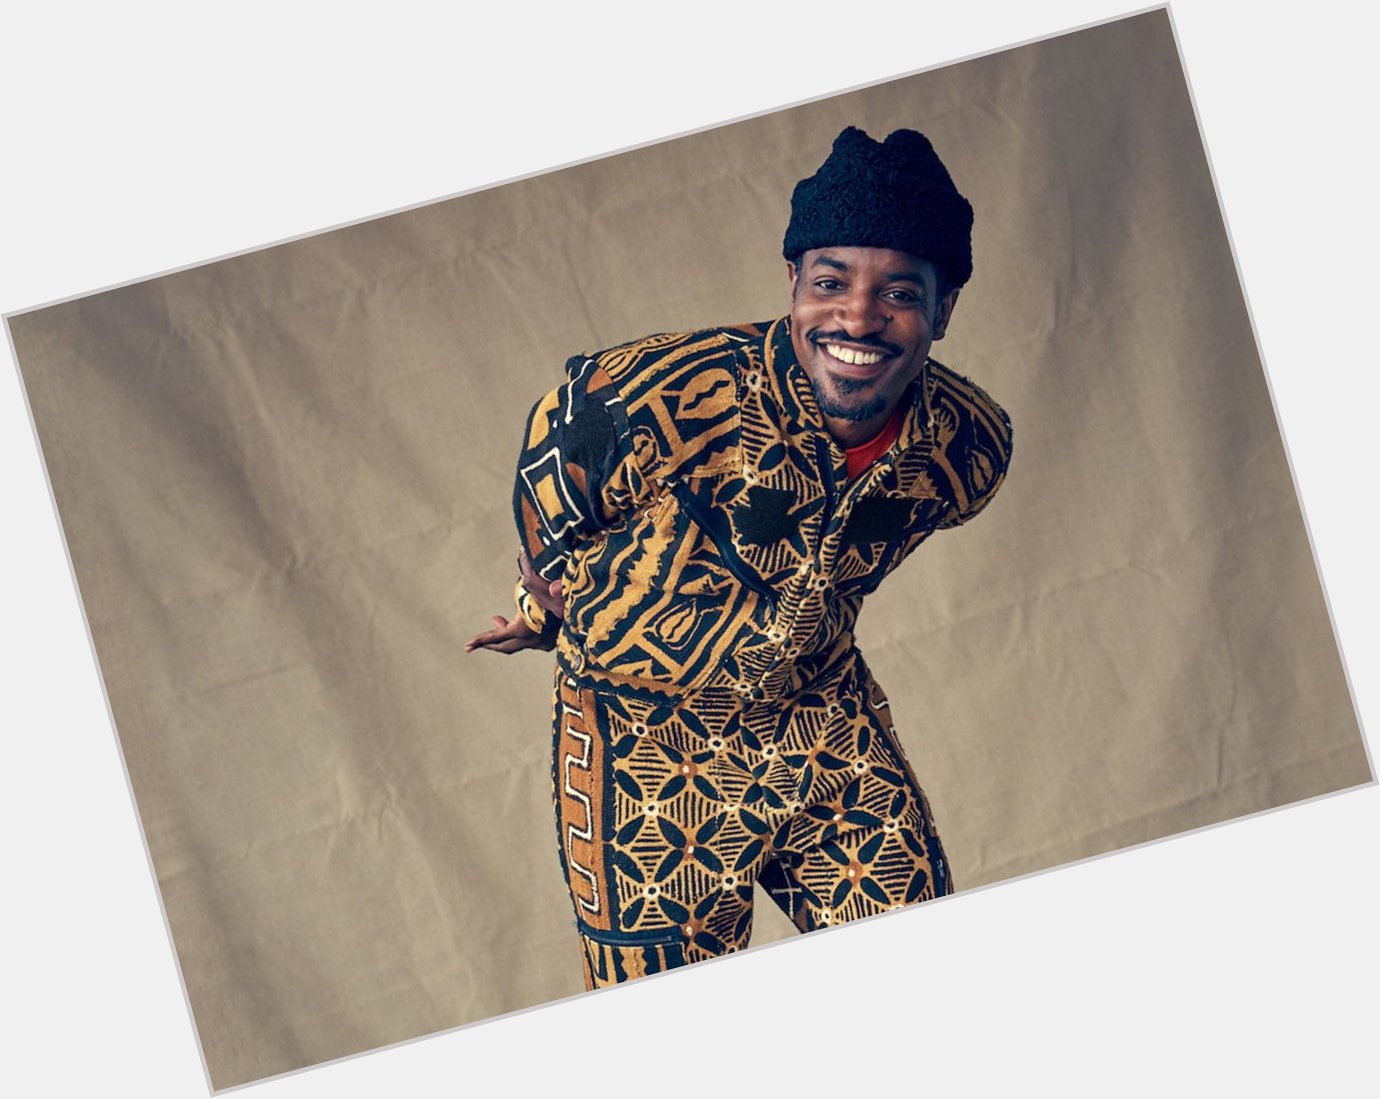 Happy birthday to one of the greatest rap lyricist of all time, the original ATLien, Andre 3000    